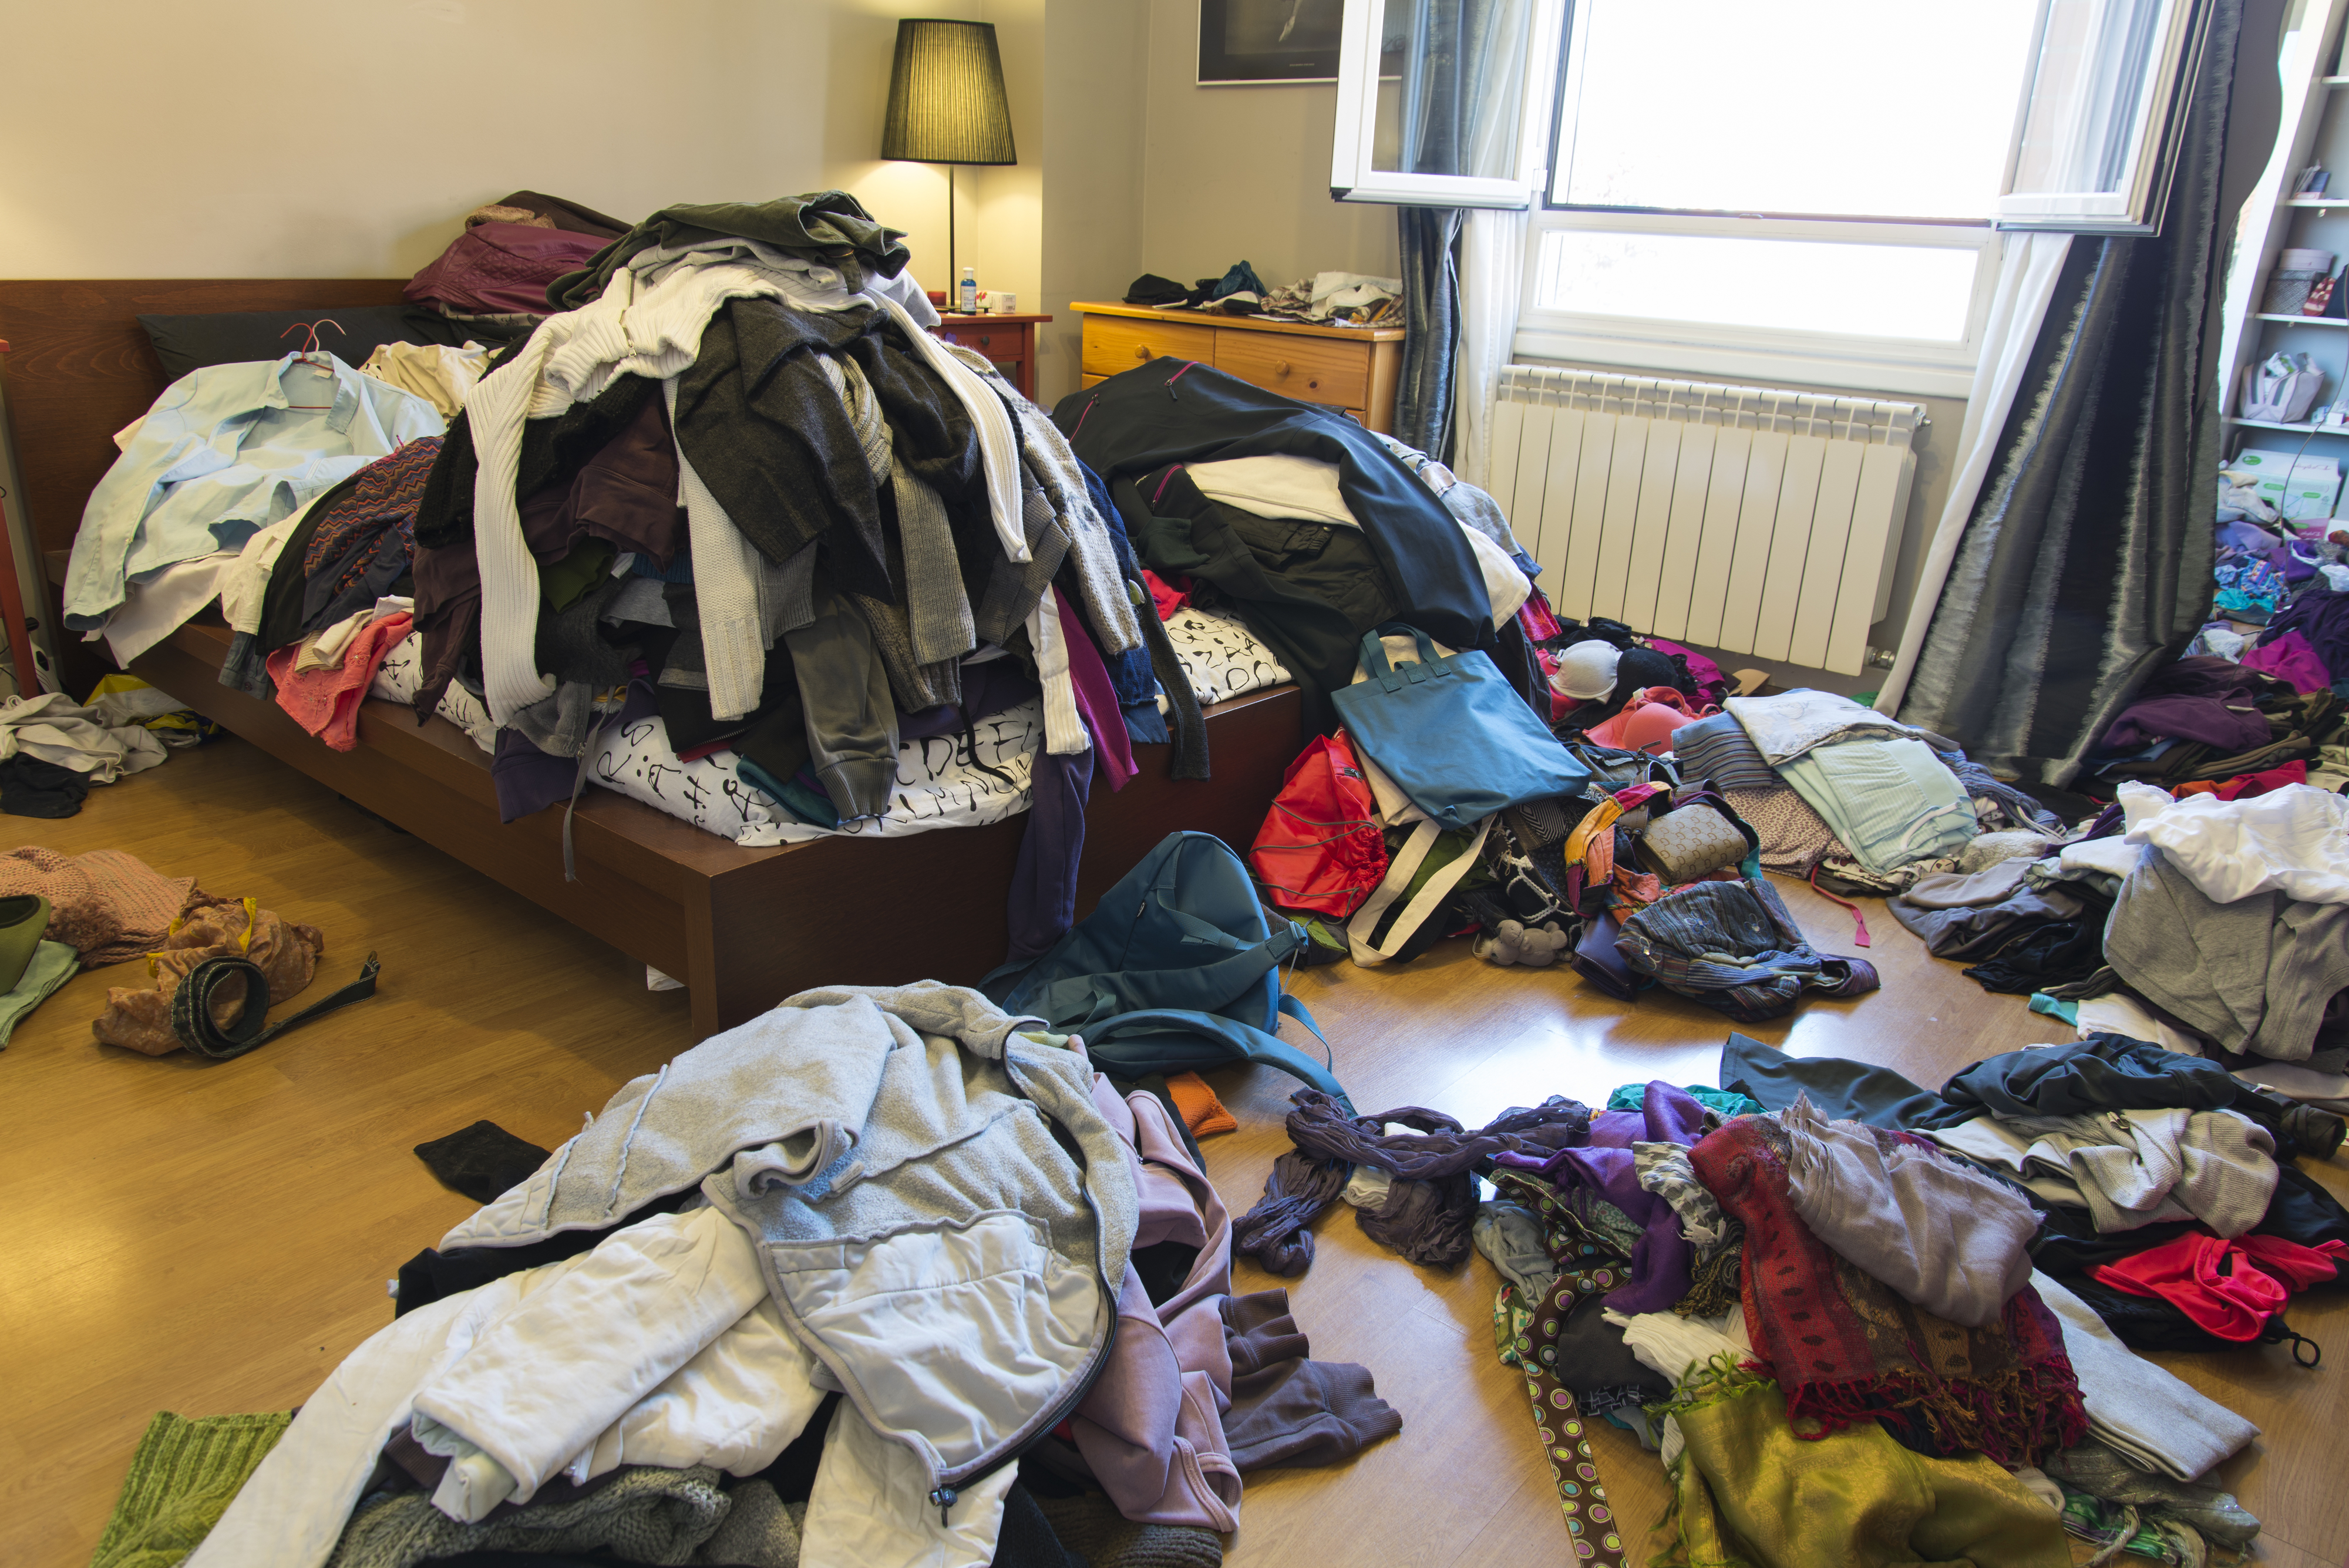 A cluttered room with clothes strewn across the bed and floor